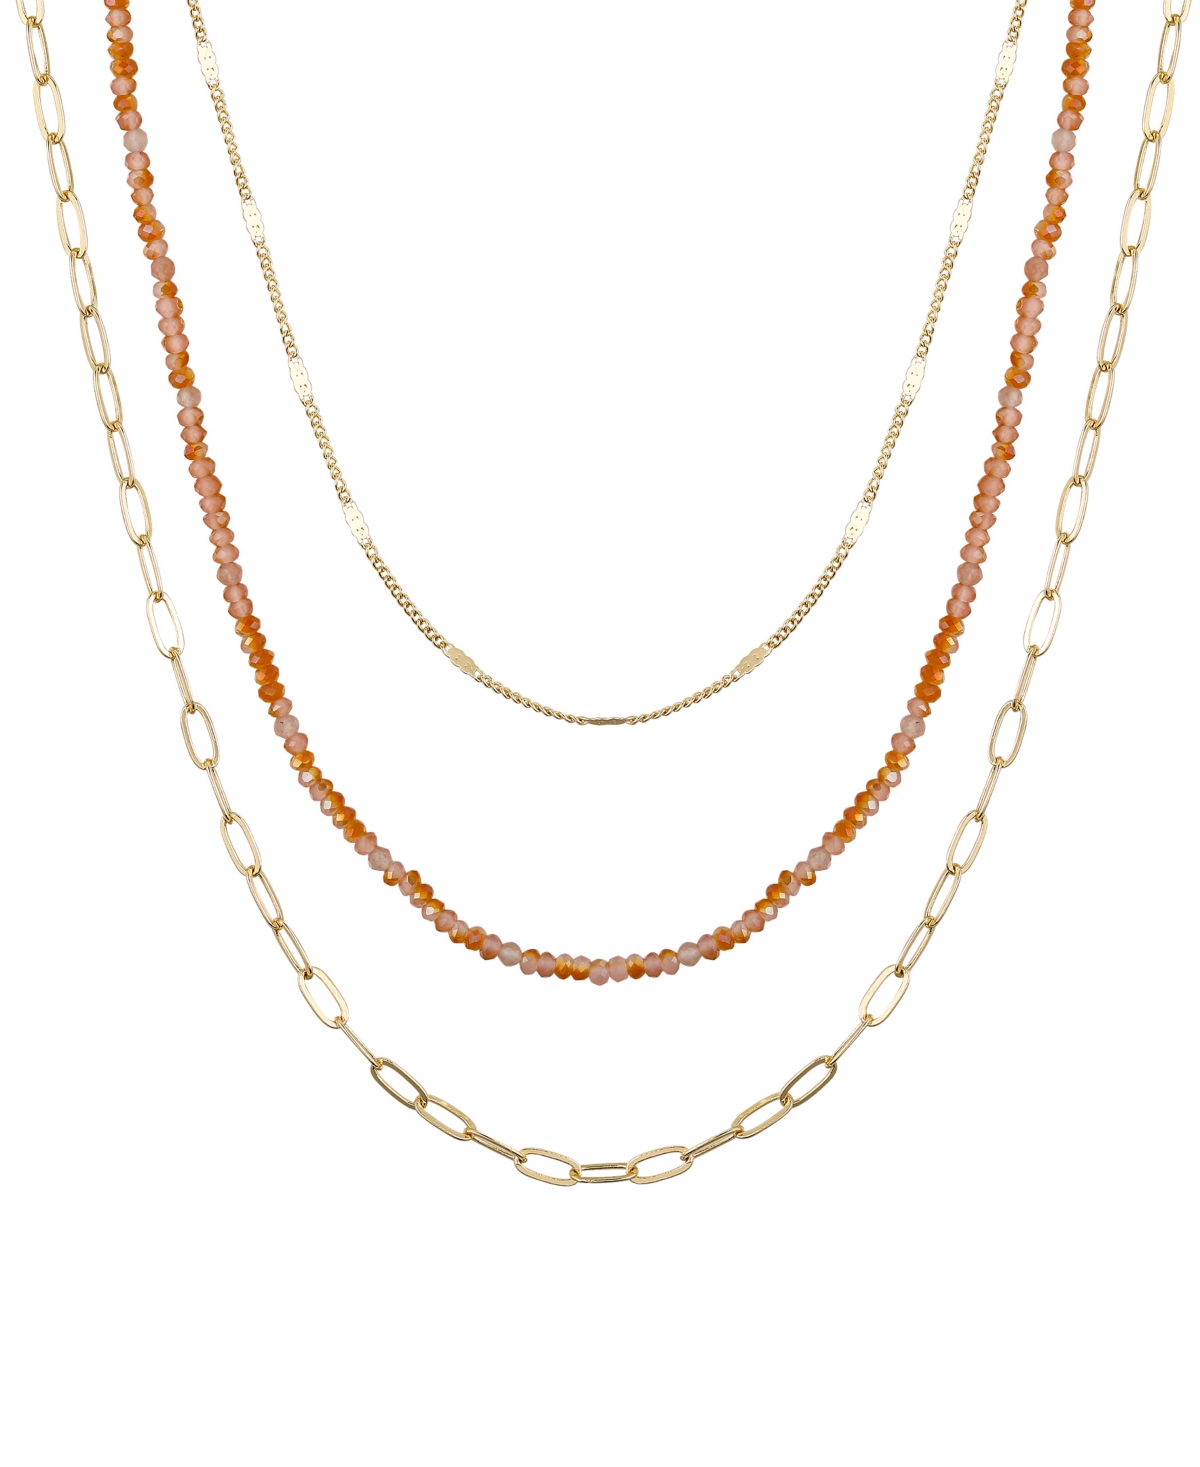 Unwritten Genuine Glass Stone And 14k Gold Plated Layered Necklace Set, 3 Pieces In Champagne